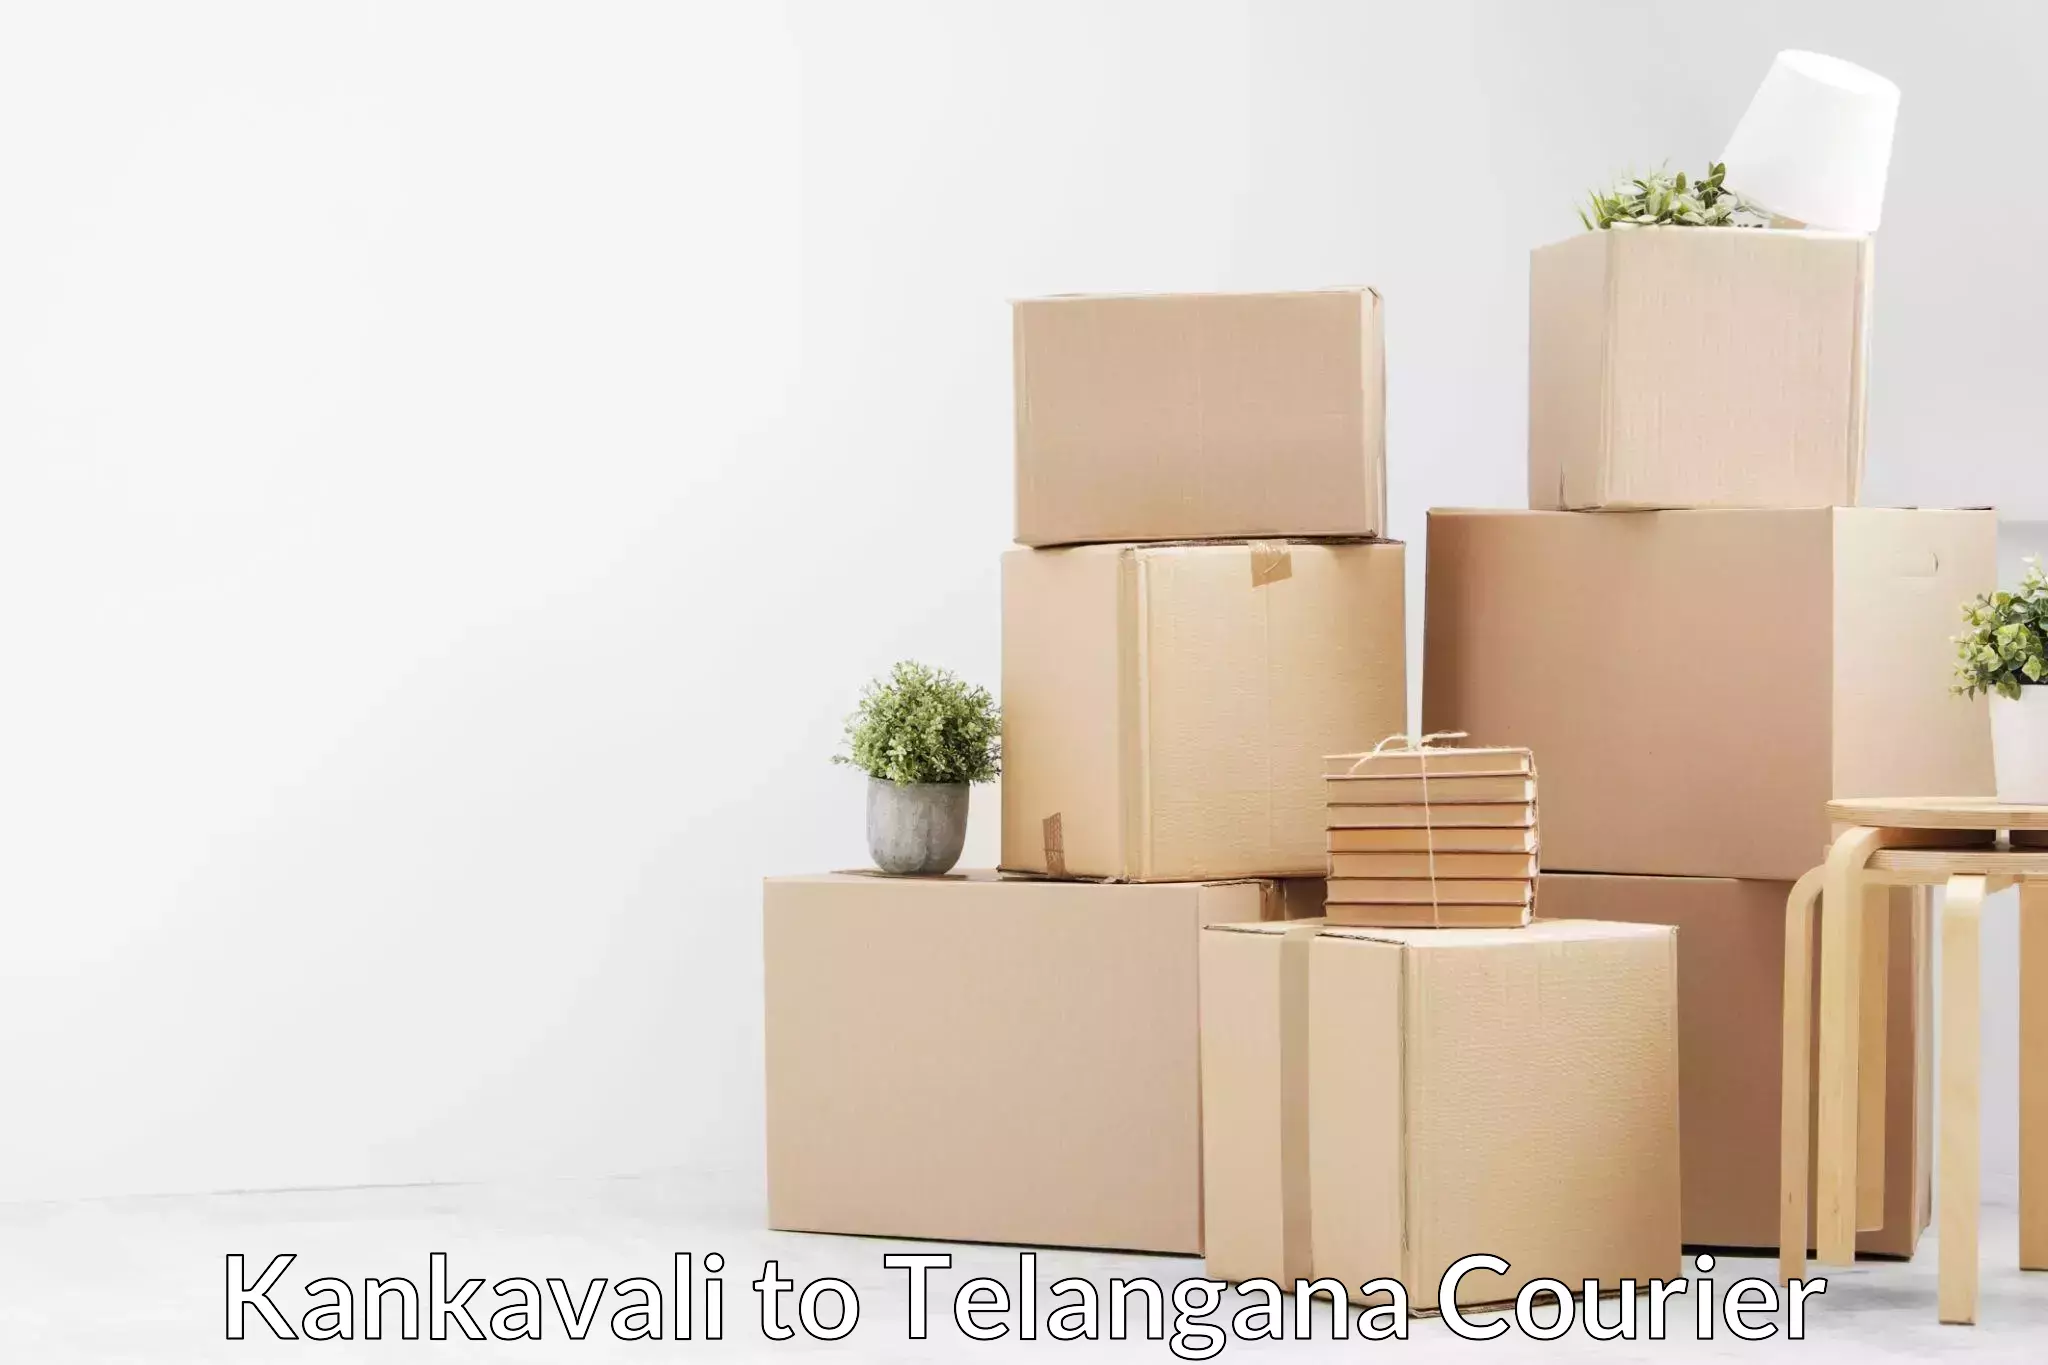 Professional movers and packers Kankavali to Secunderabad